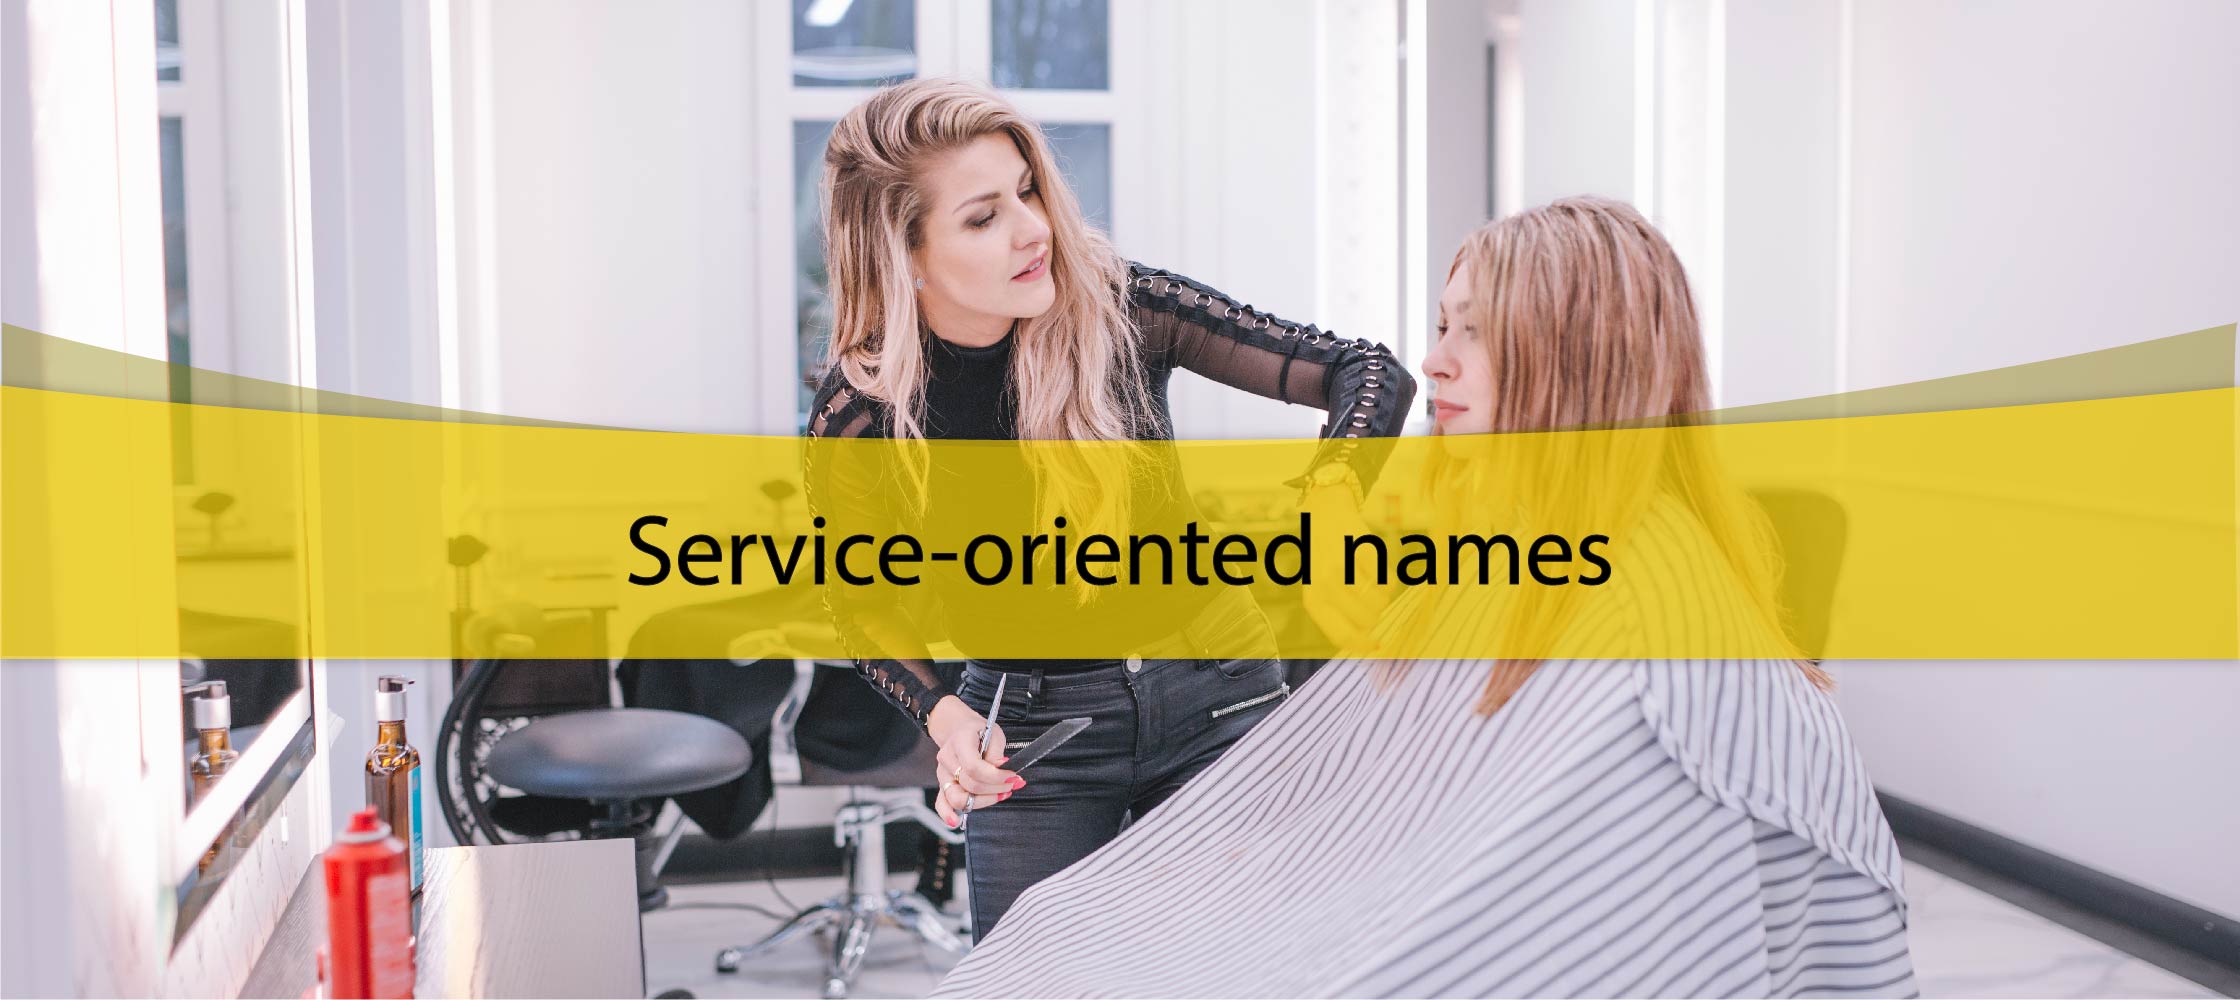 Service-oriented names